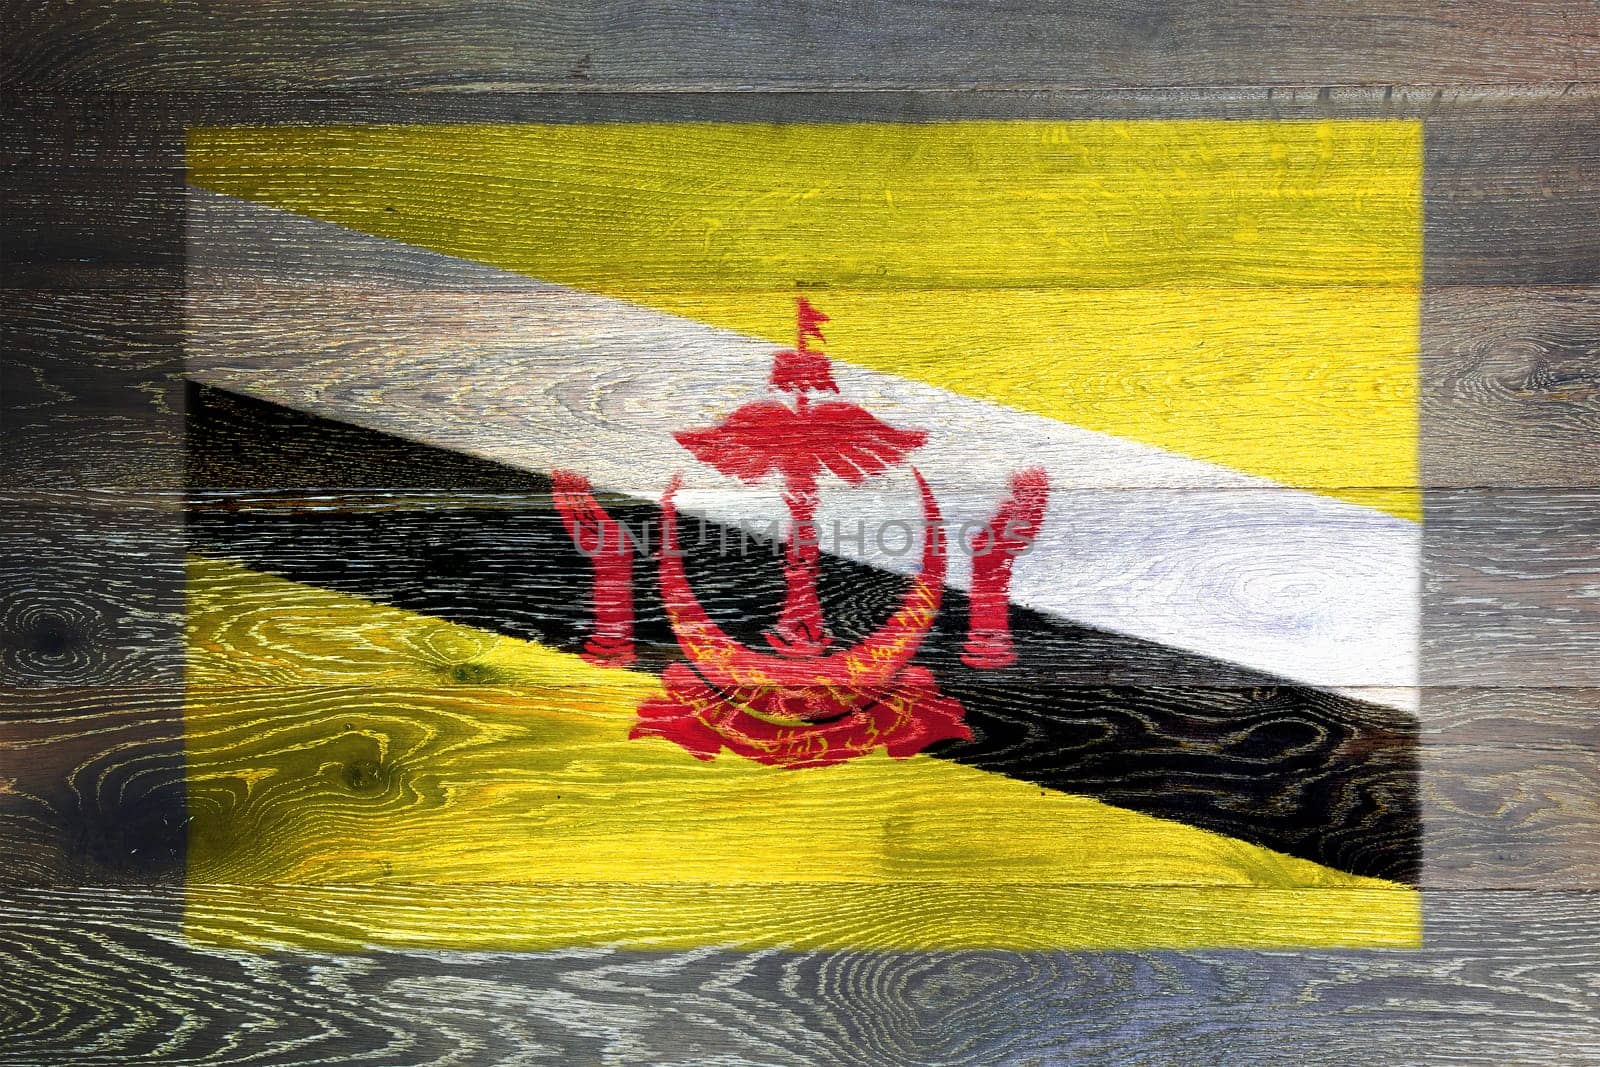 Brunei flag on rustic old wood surface background by VivacityImages